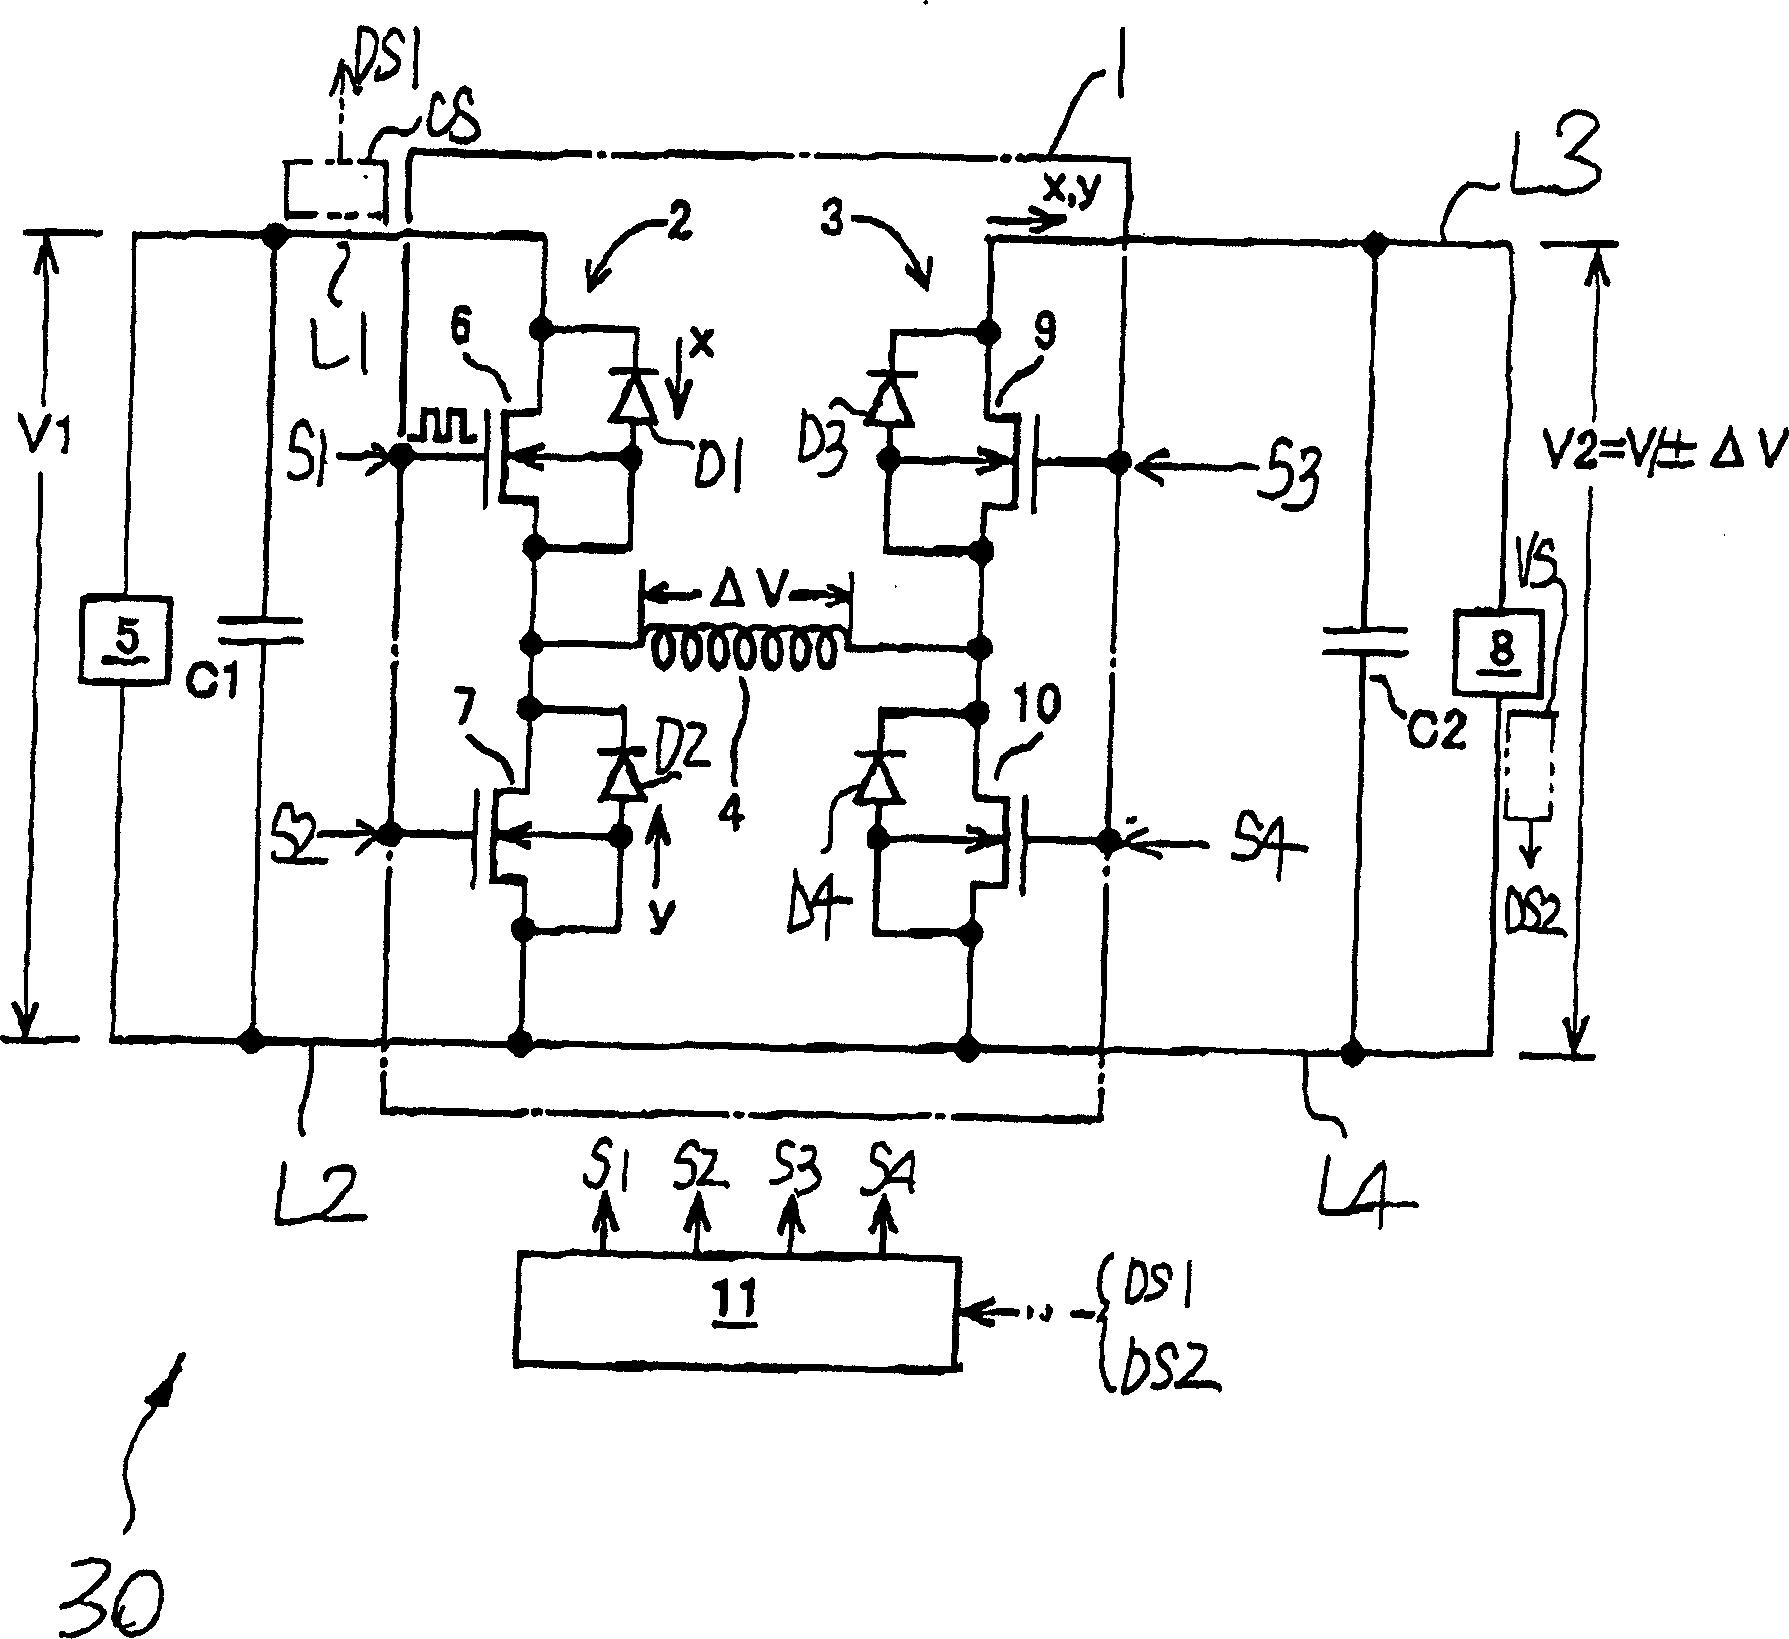 Reversible back-boost chopper circuit, and inverter circuit with the same